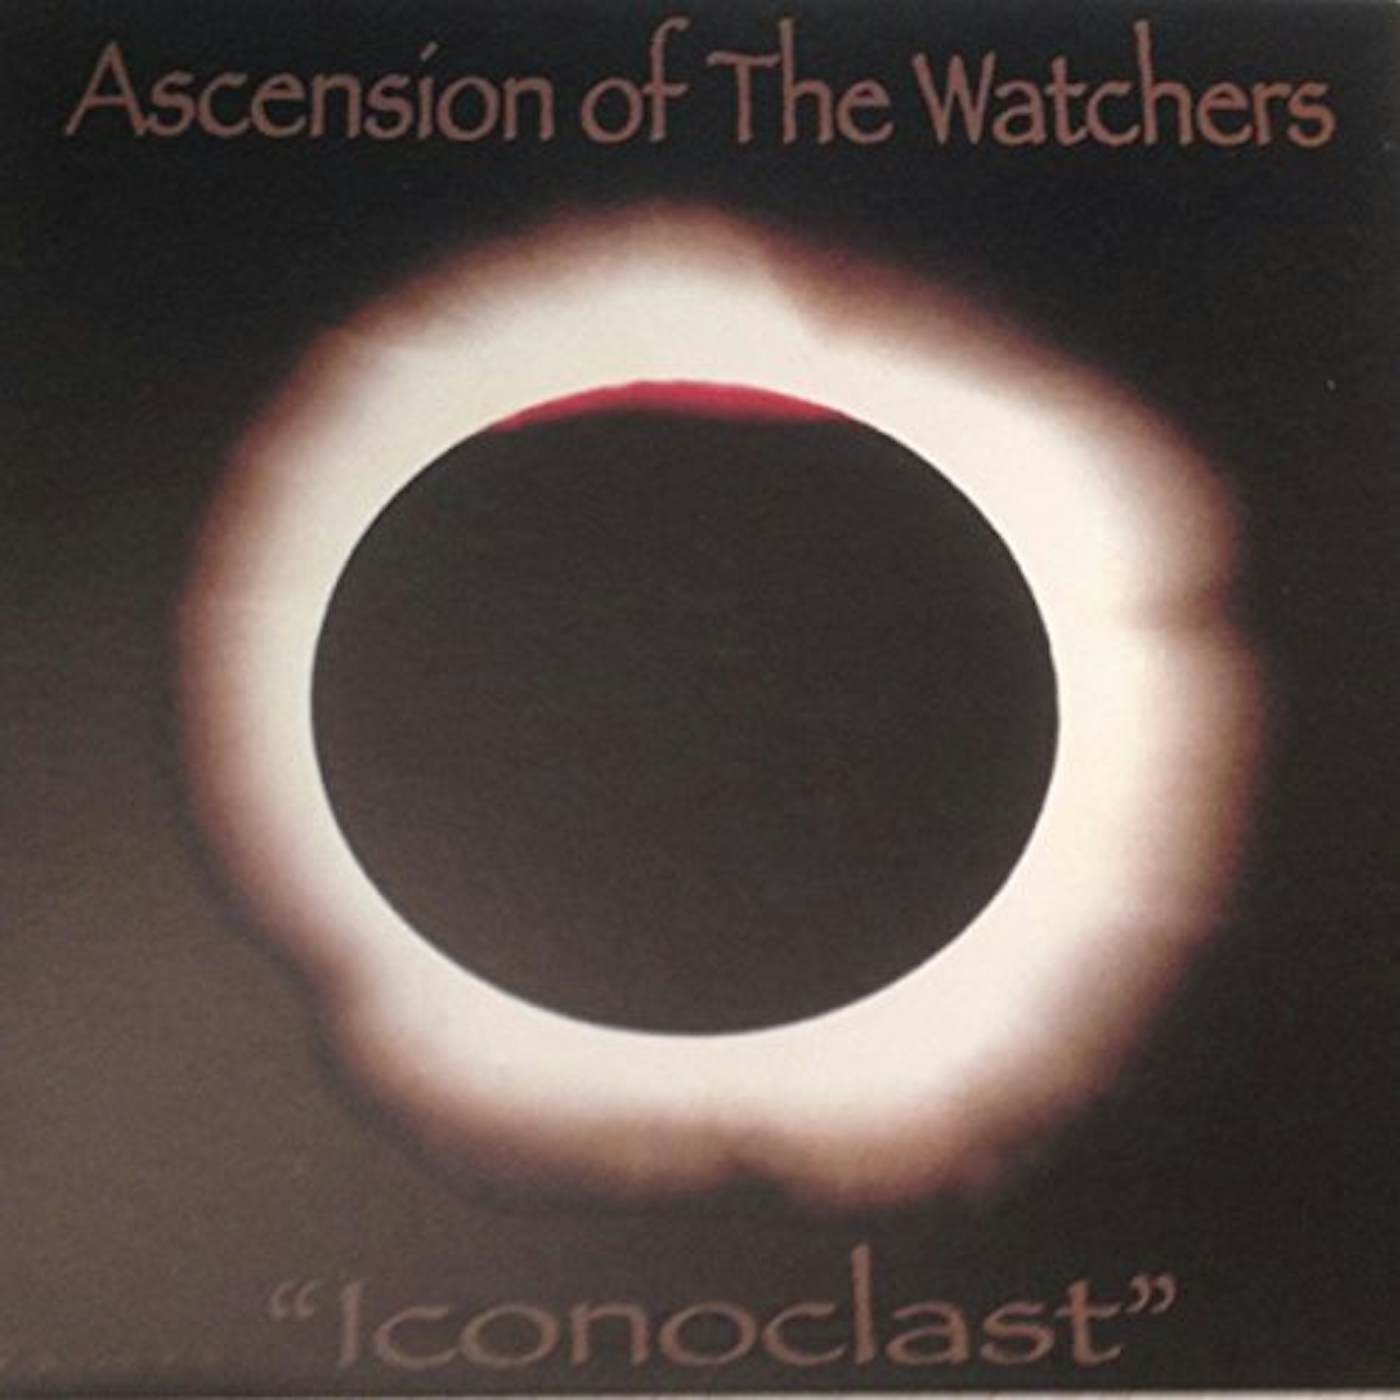 Ascension Of The Watchers Iconoclast Vinyl Record